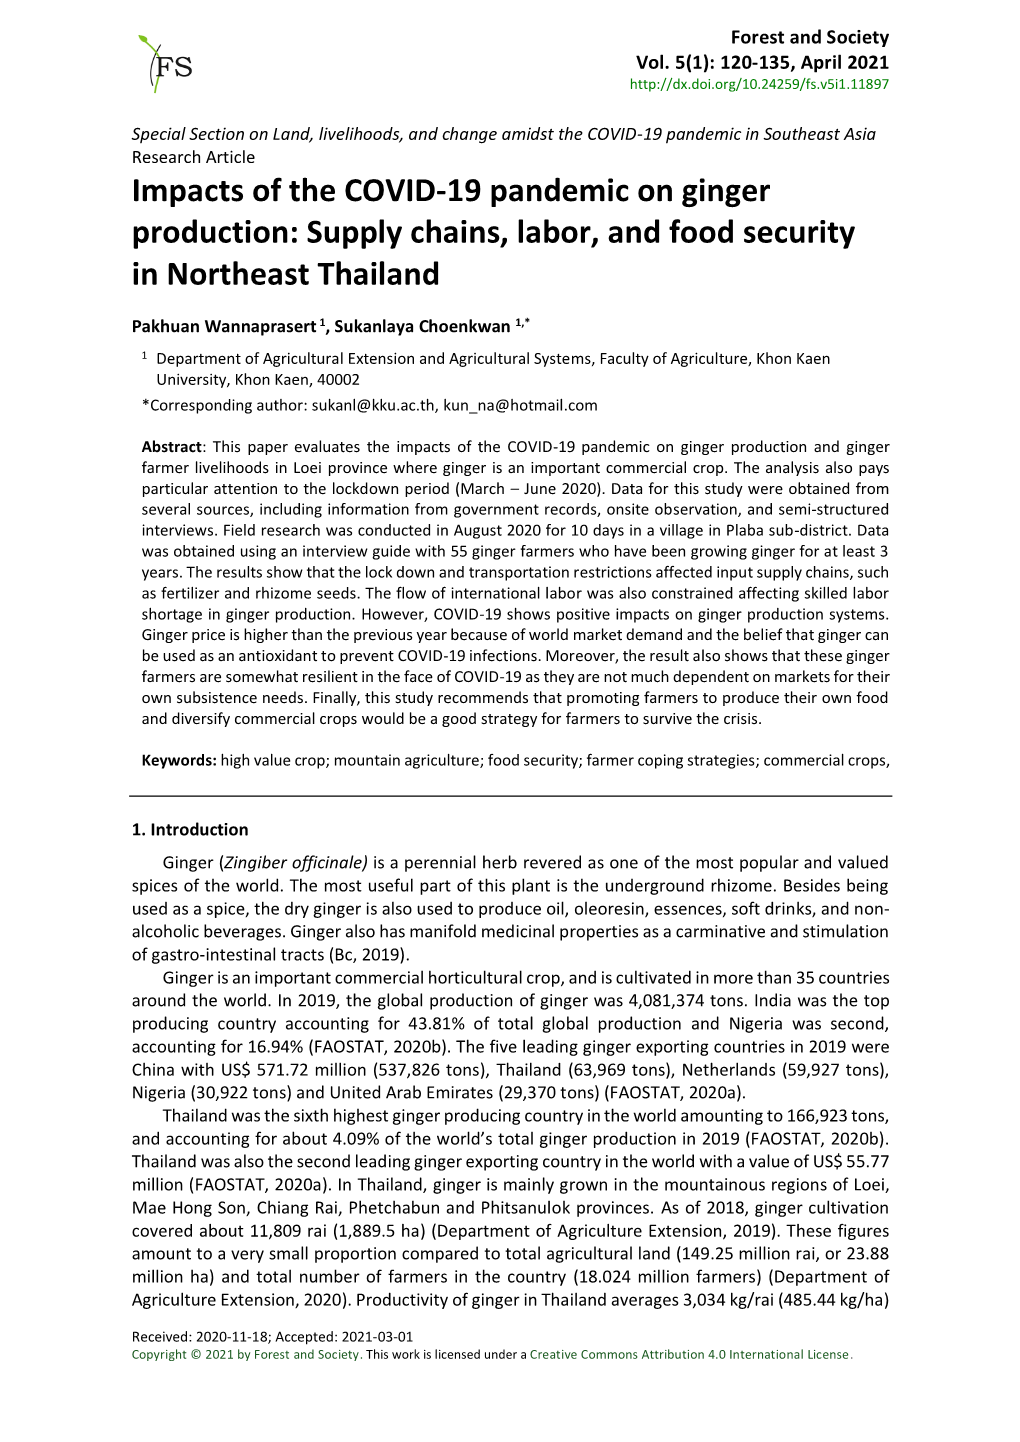 Impacts of the COVID-19 Pandemic on Ginger Production: Supply Chains, Labor, and Food Security in Northeast Thailand